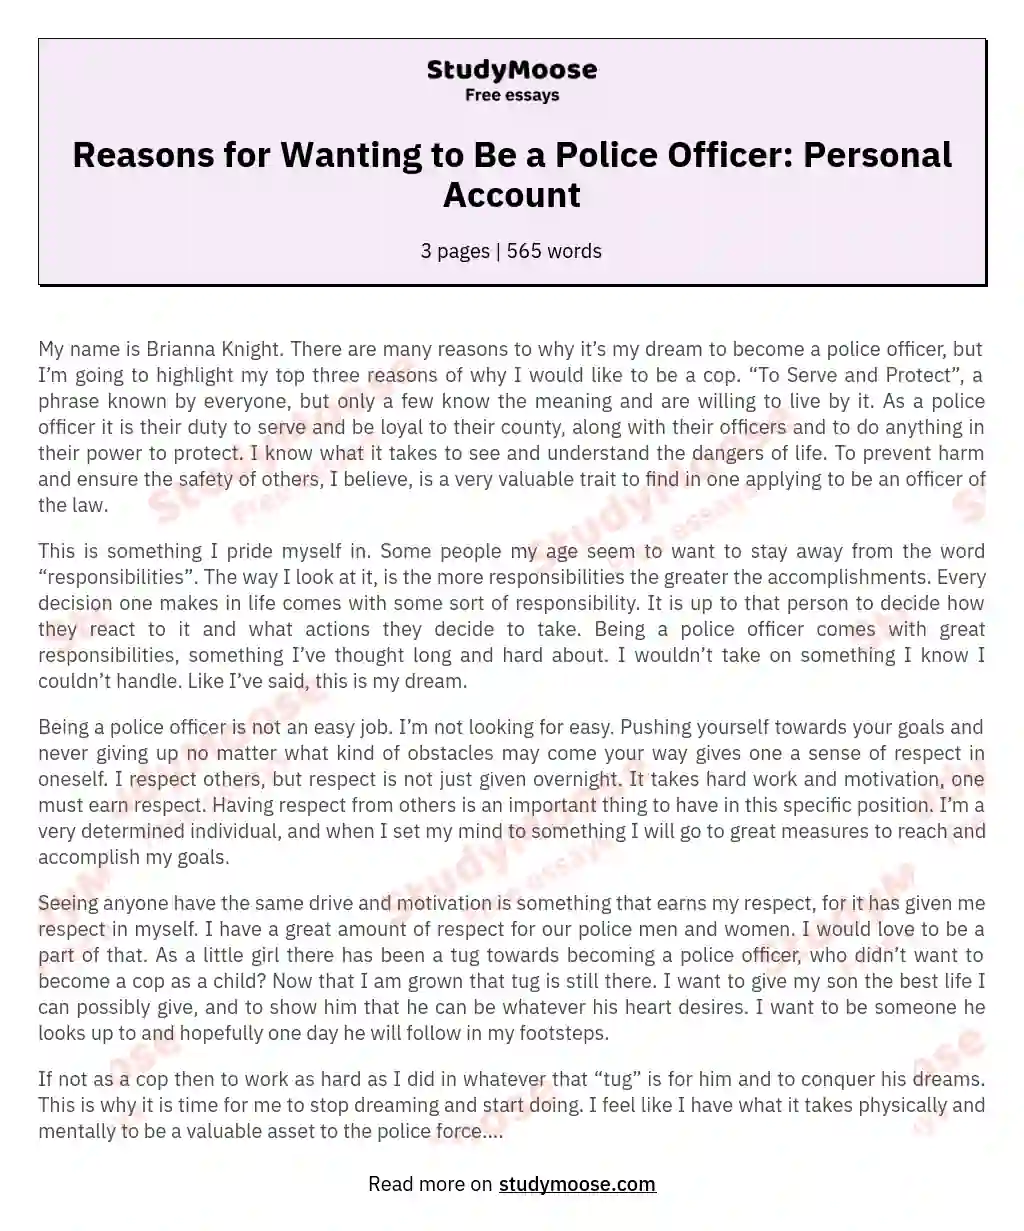 Reasons for Wanting to Be a Police Officer: Personal Account essay